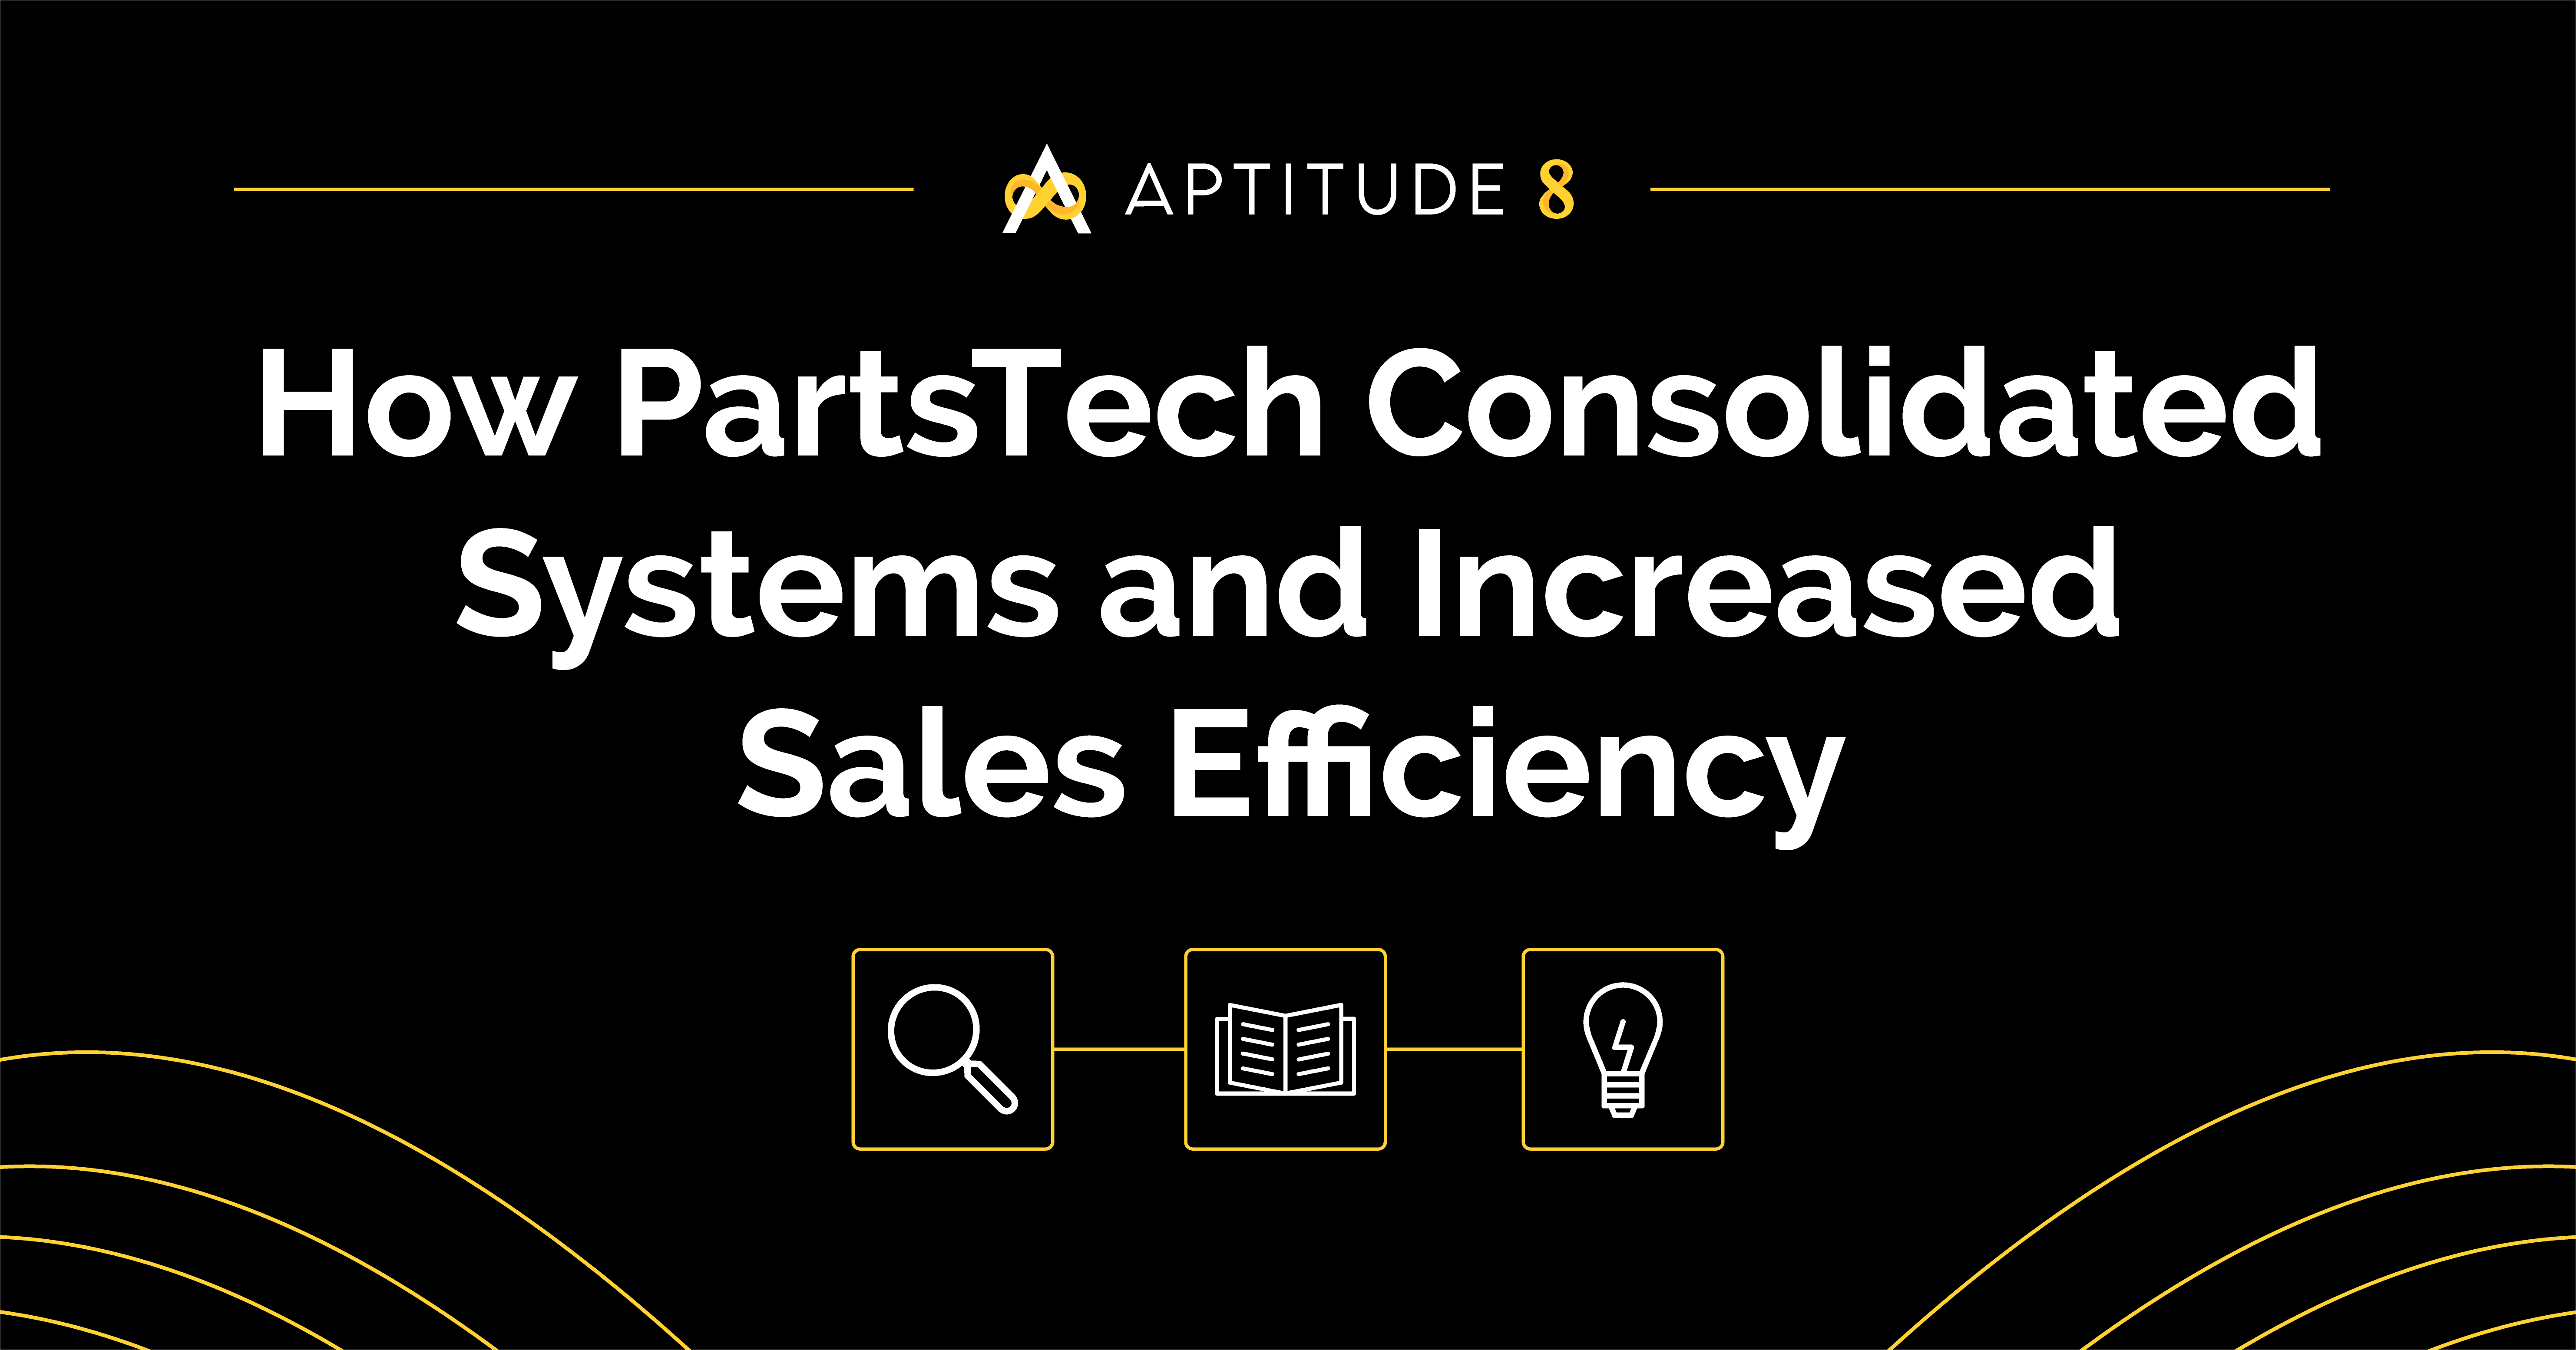 How PartsTech Consolidated Systems and Increased Sales Efficiency